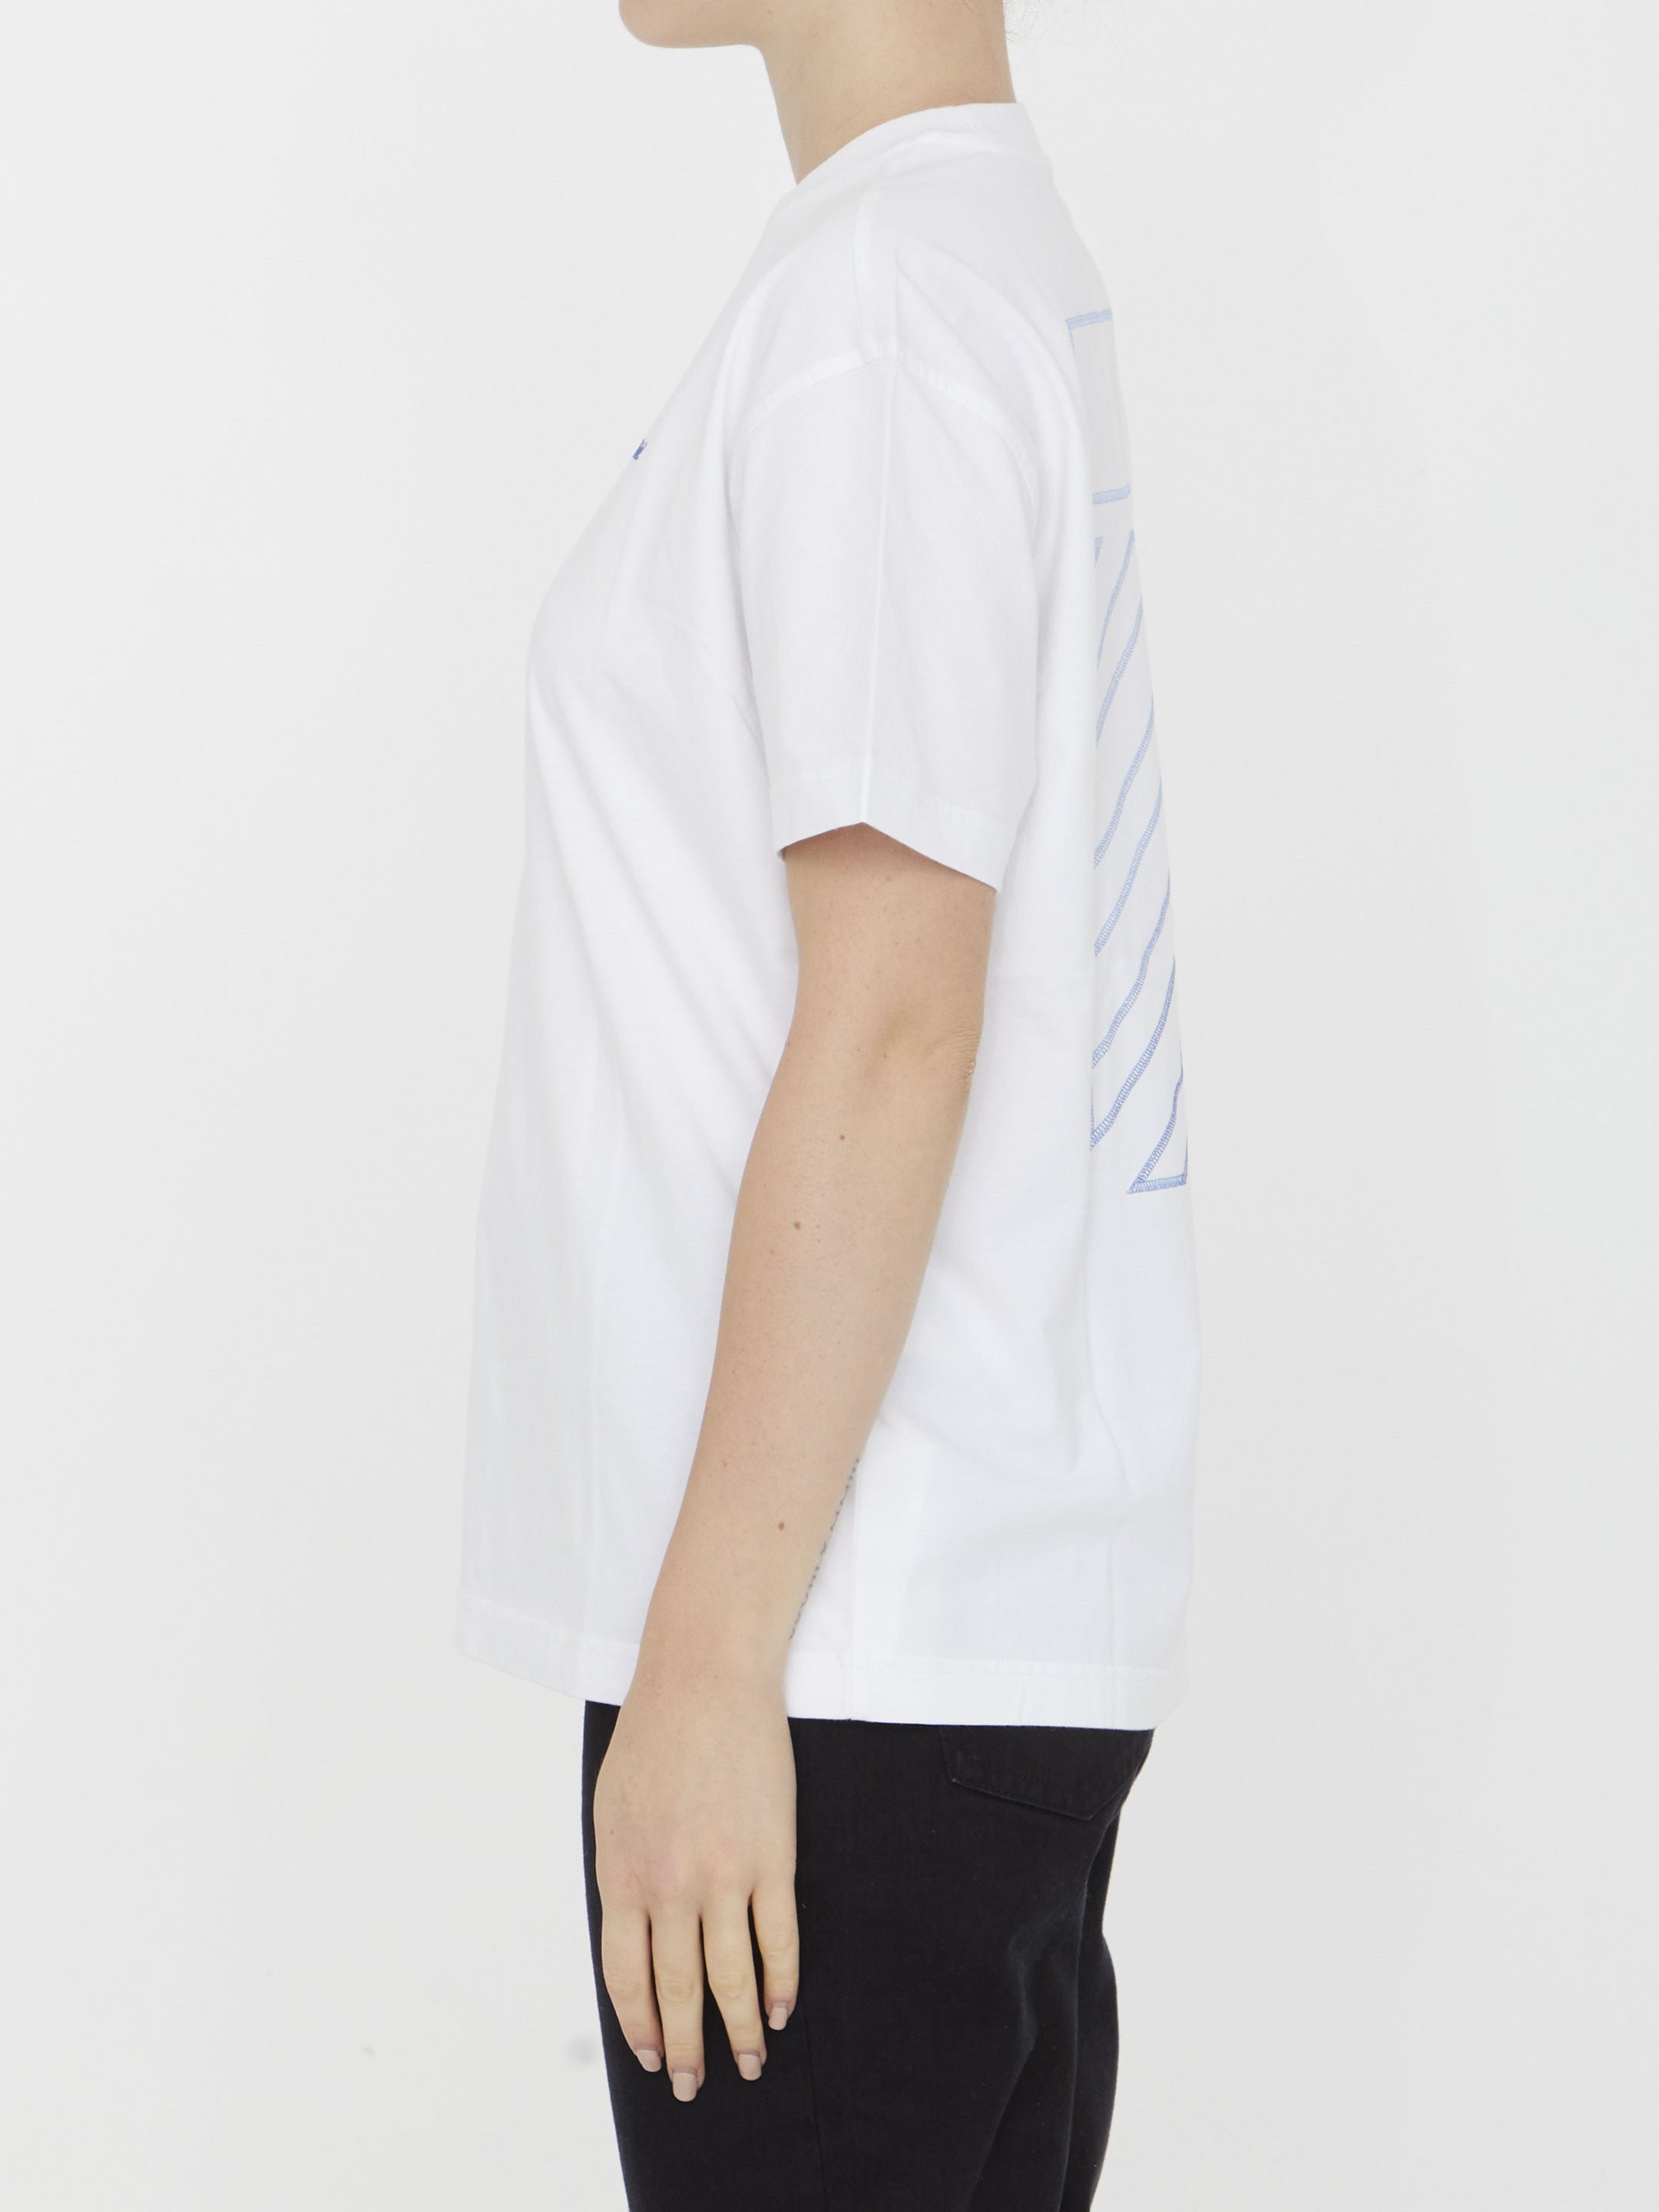 OFF-WHITE-OUTLET-SALE-Diag-Tab-t-shirt-Shirts-XS-WHITE-ARCHIVE-COLLECTION-3.jpg